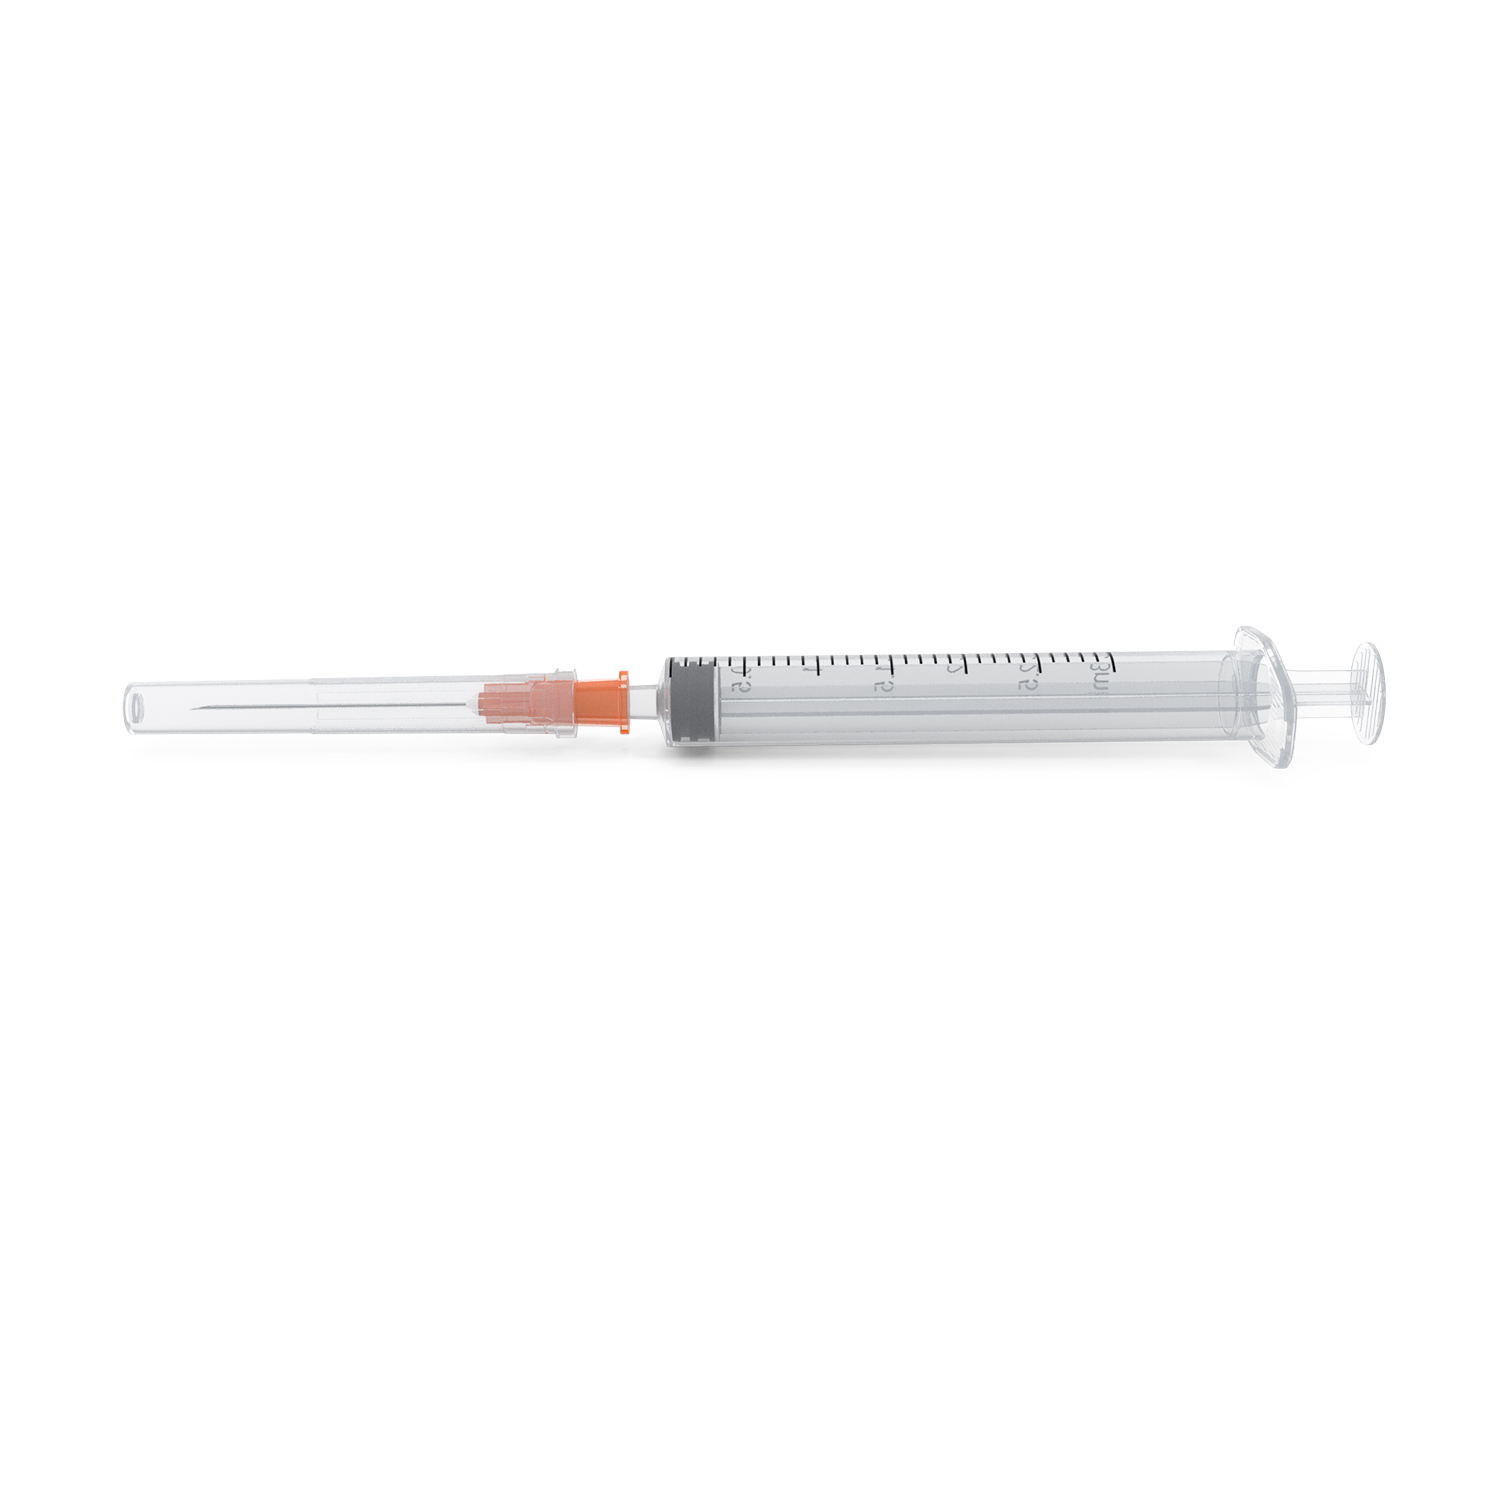 Syringe with Needle Combos For Sale| Fast Shipping | BC9.org